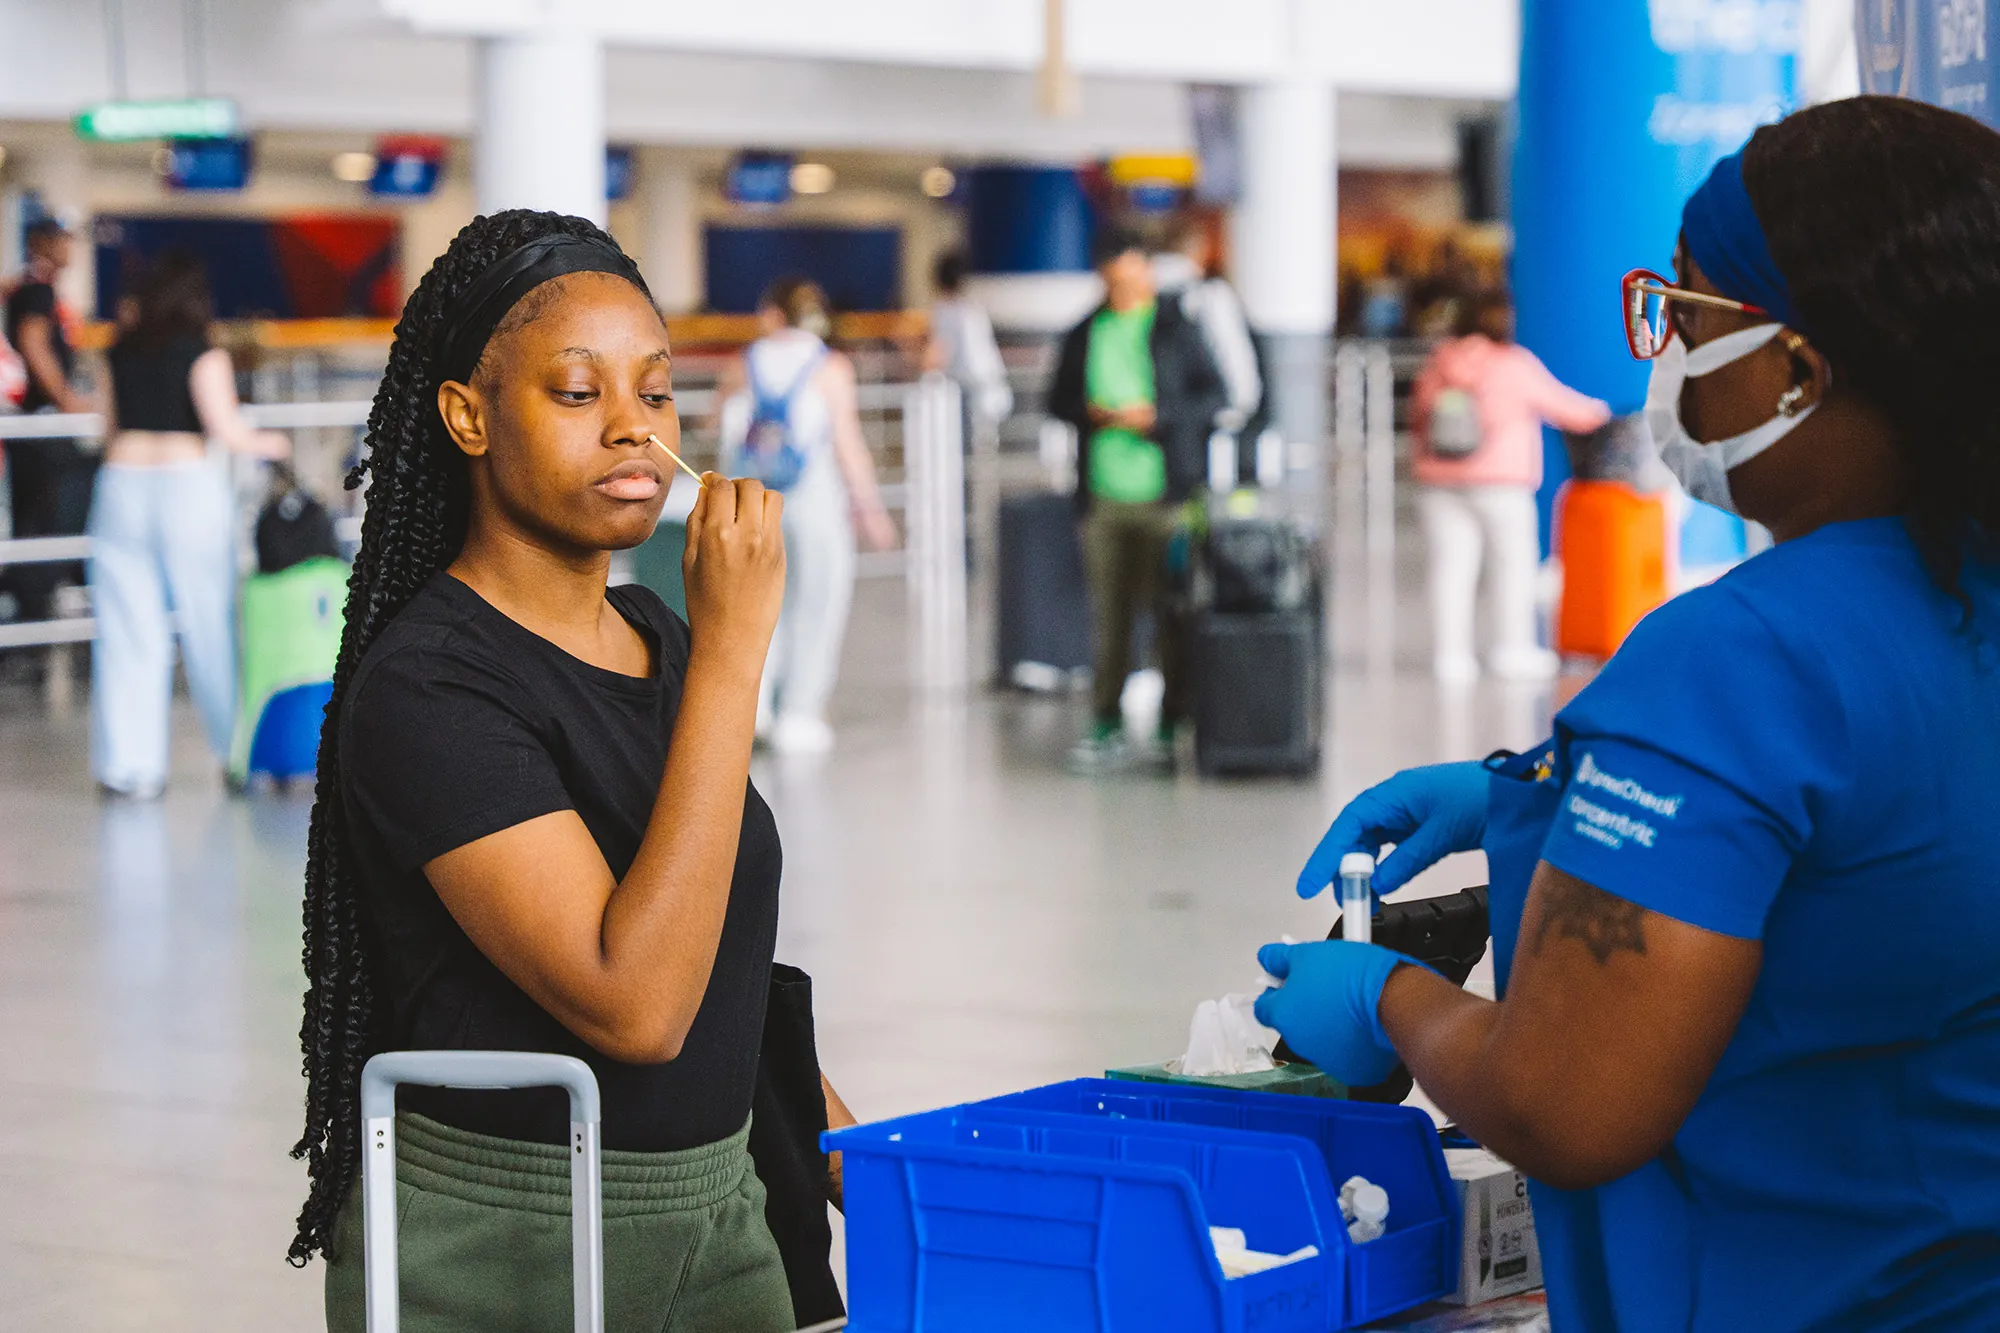 Female Swabs her nose at the airport to test for viruses